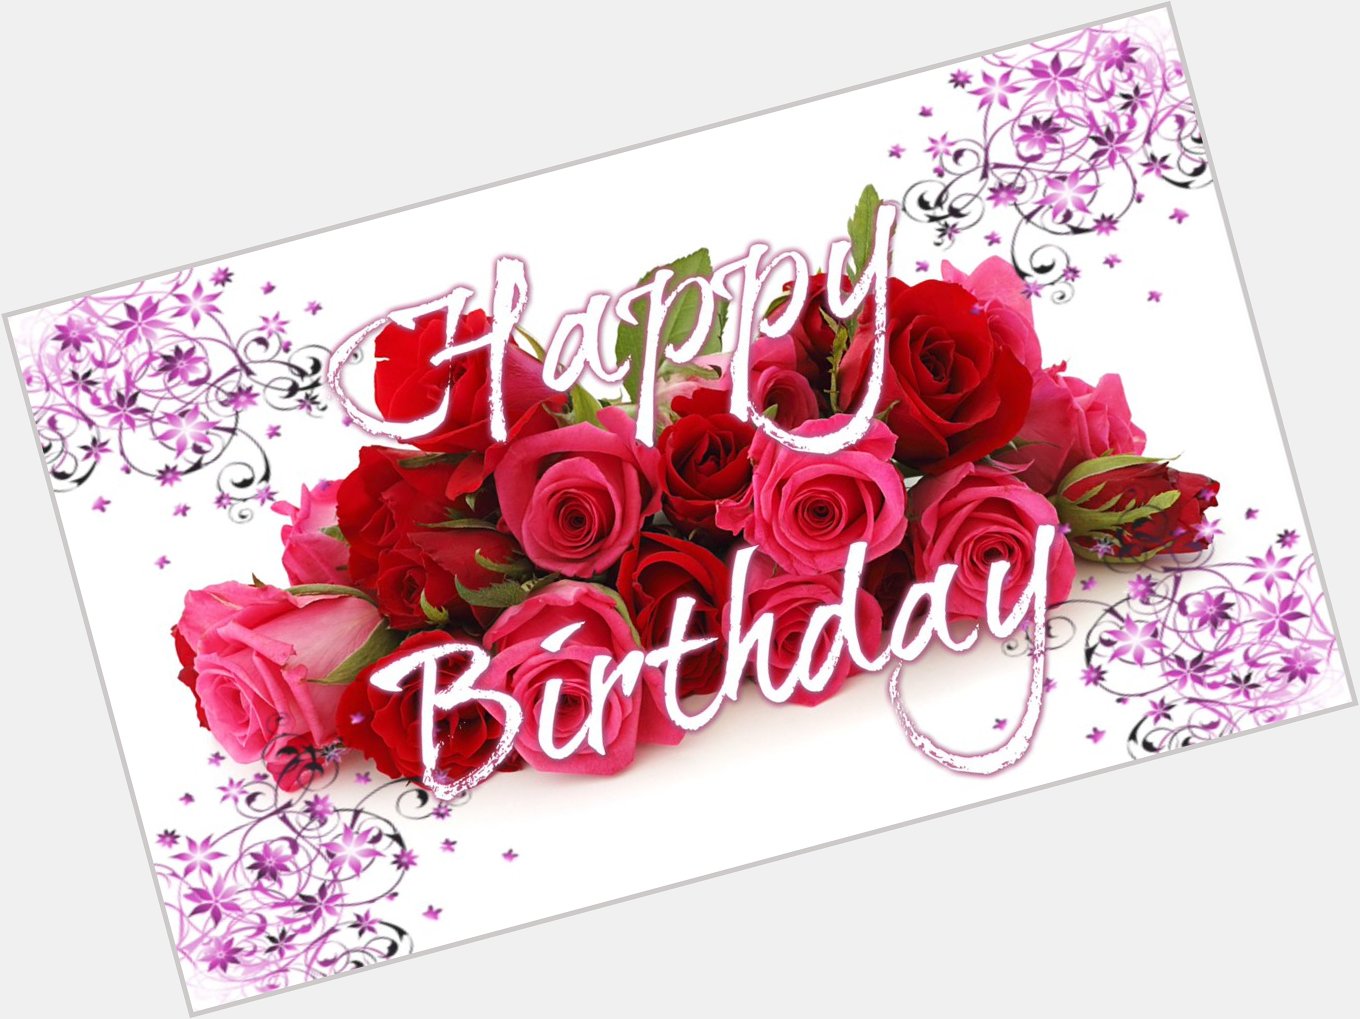  Hello  happy  Birthday stay healthy and keep your heartfelt greetings from Berlin Germany 